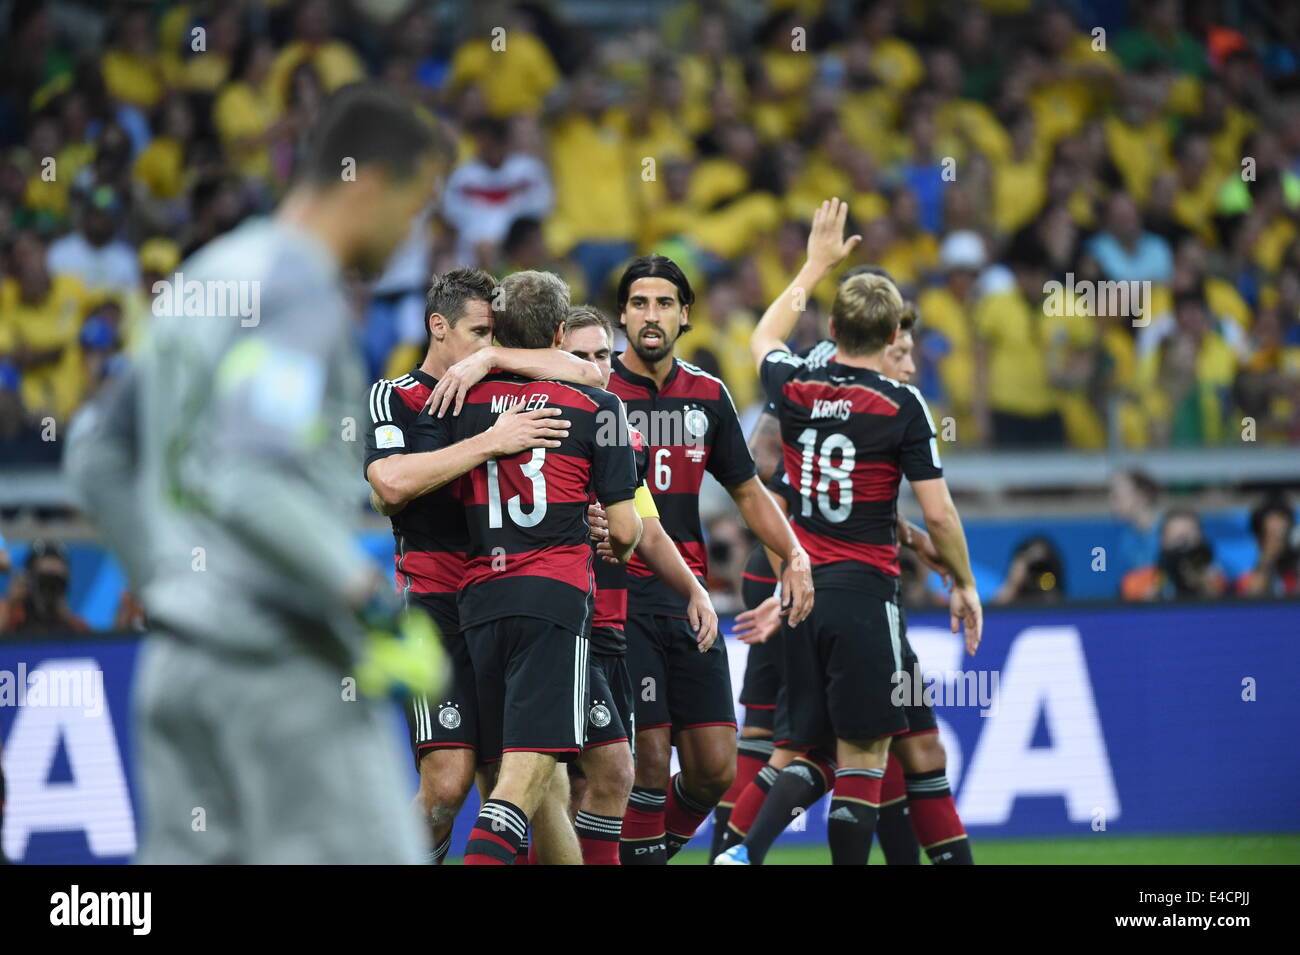 Belo Horizonte, Brazil. 08th July, 2014. Miroslav Klose (L-R) of Germany celebrates with his teammmates Thomas Mueller, Philipp Lahm, Sami Khedira and Toni Kroos after scoring 0-2 goal during the FIFA World Cup 2014 semi-final soccer match between Brazil and Germany at Estadio Mineirao in Belo Horizonte, Brazil, 08 July 2014. Photo: Marcus Brandt/dpa/Alamy Live News Stock Photo